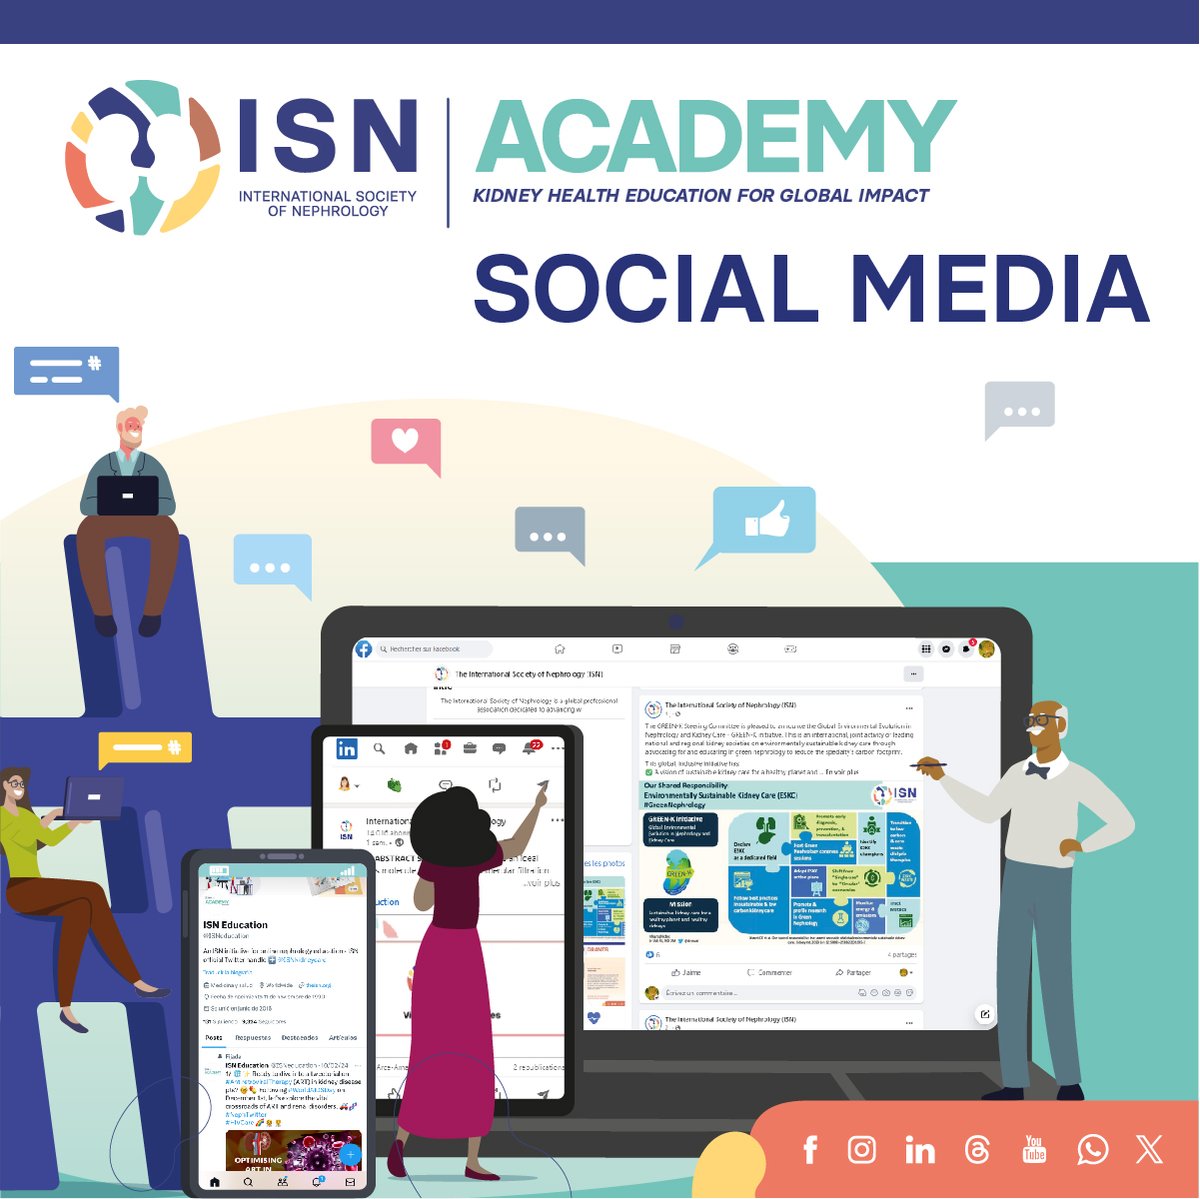 Transform your nephrology education with ISN's cutting-edge Social Media initiatives, uniting a global community committed to advancing kidney health worldwide 🤓💪📱 Access the content at the ISN Academy ➡️ bit.ly/49E0vHg